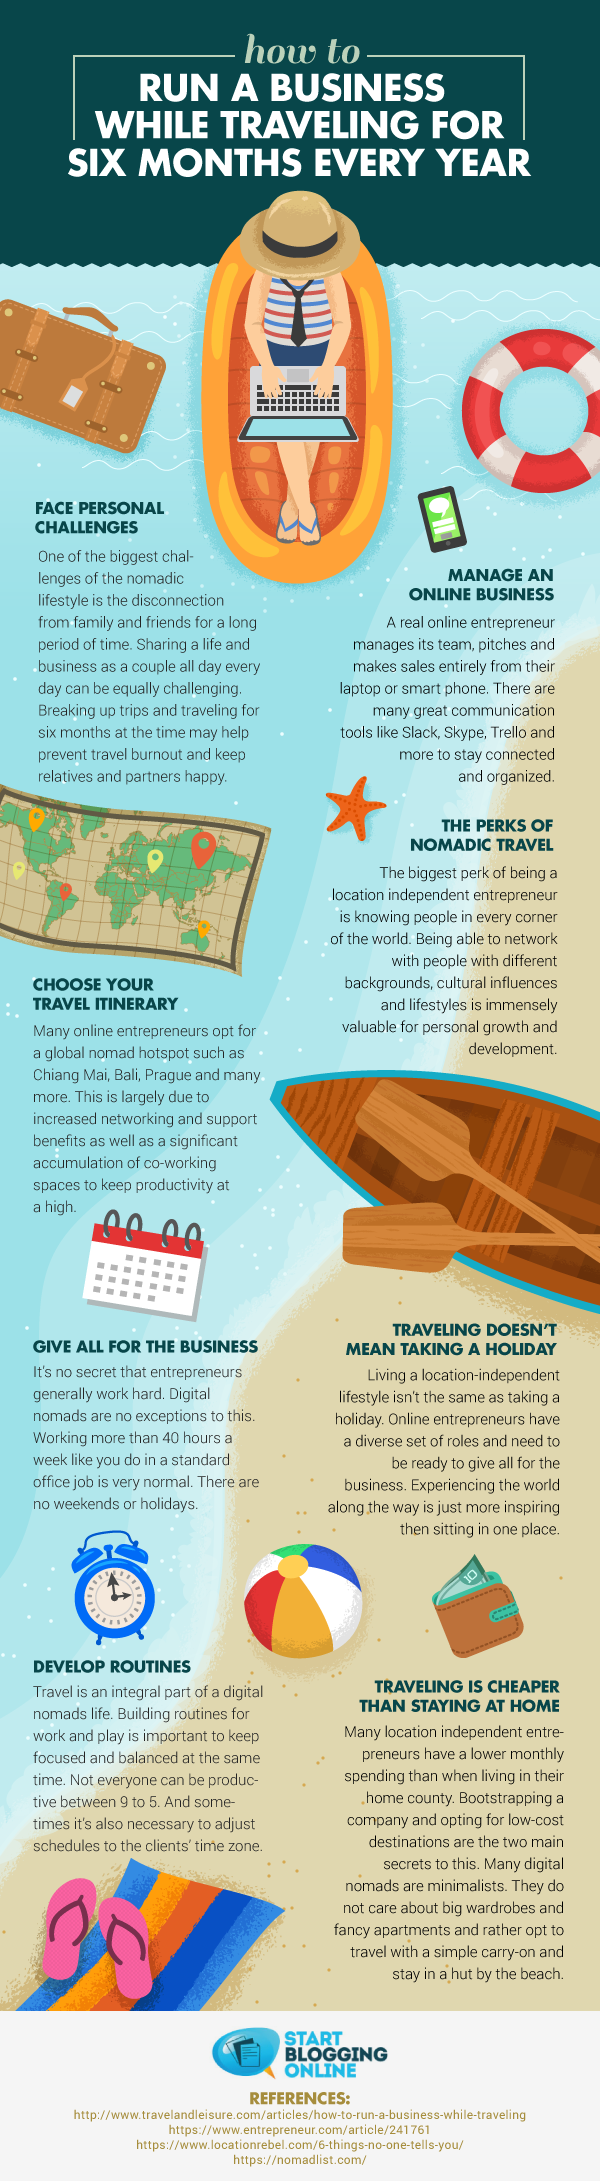 how-to-run-a-business-while-traveling